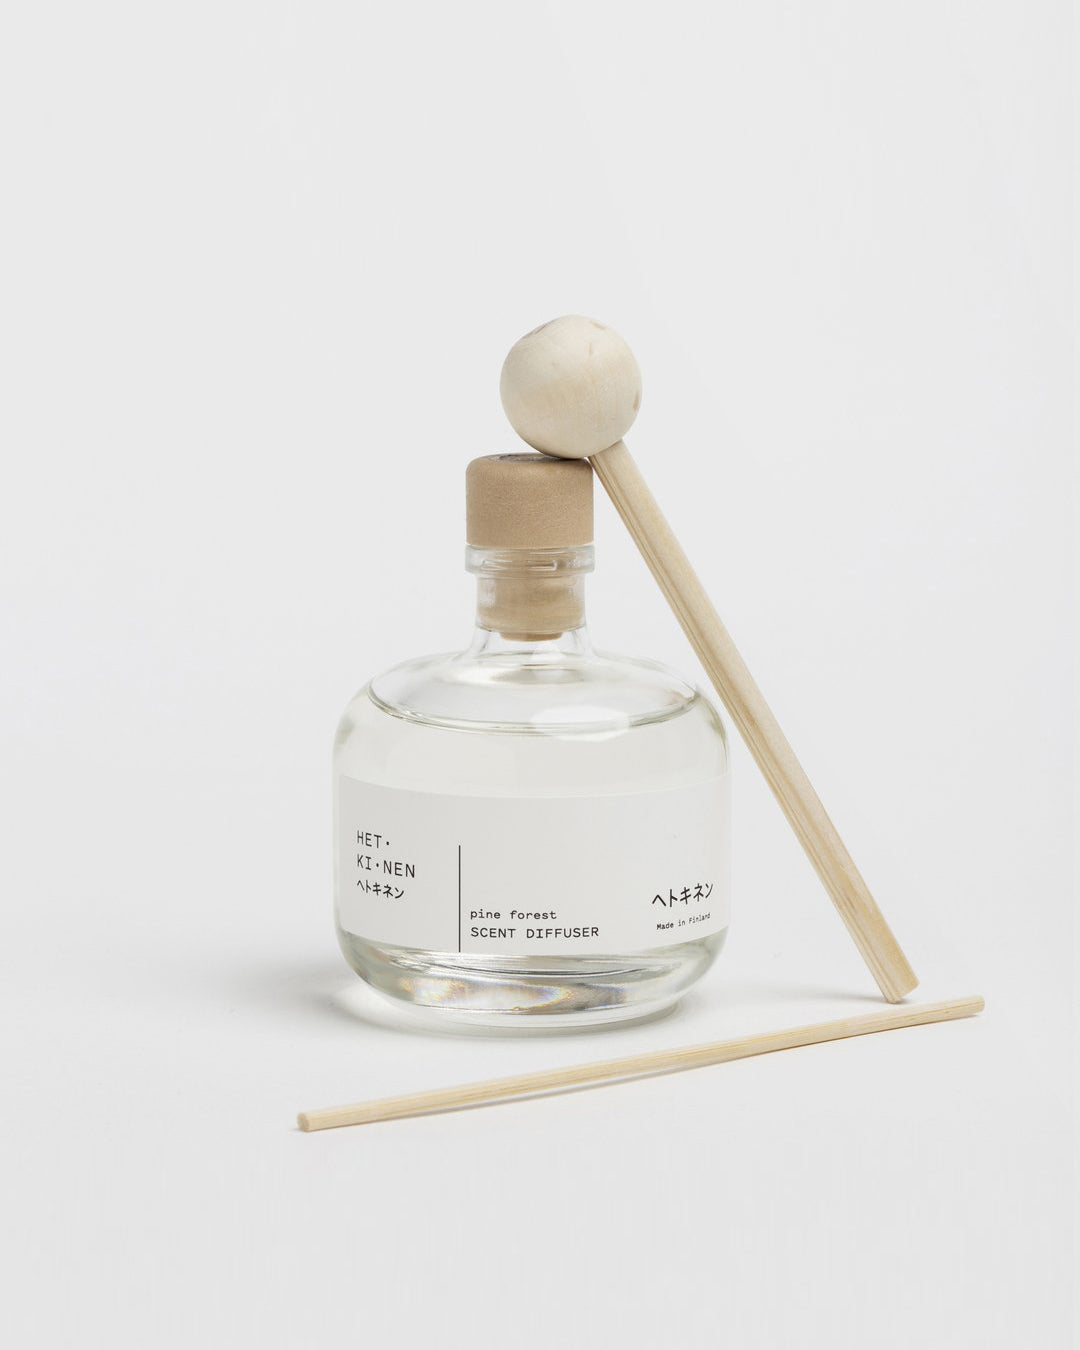 Scent diffuser “Pine Forest”